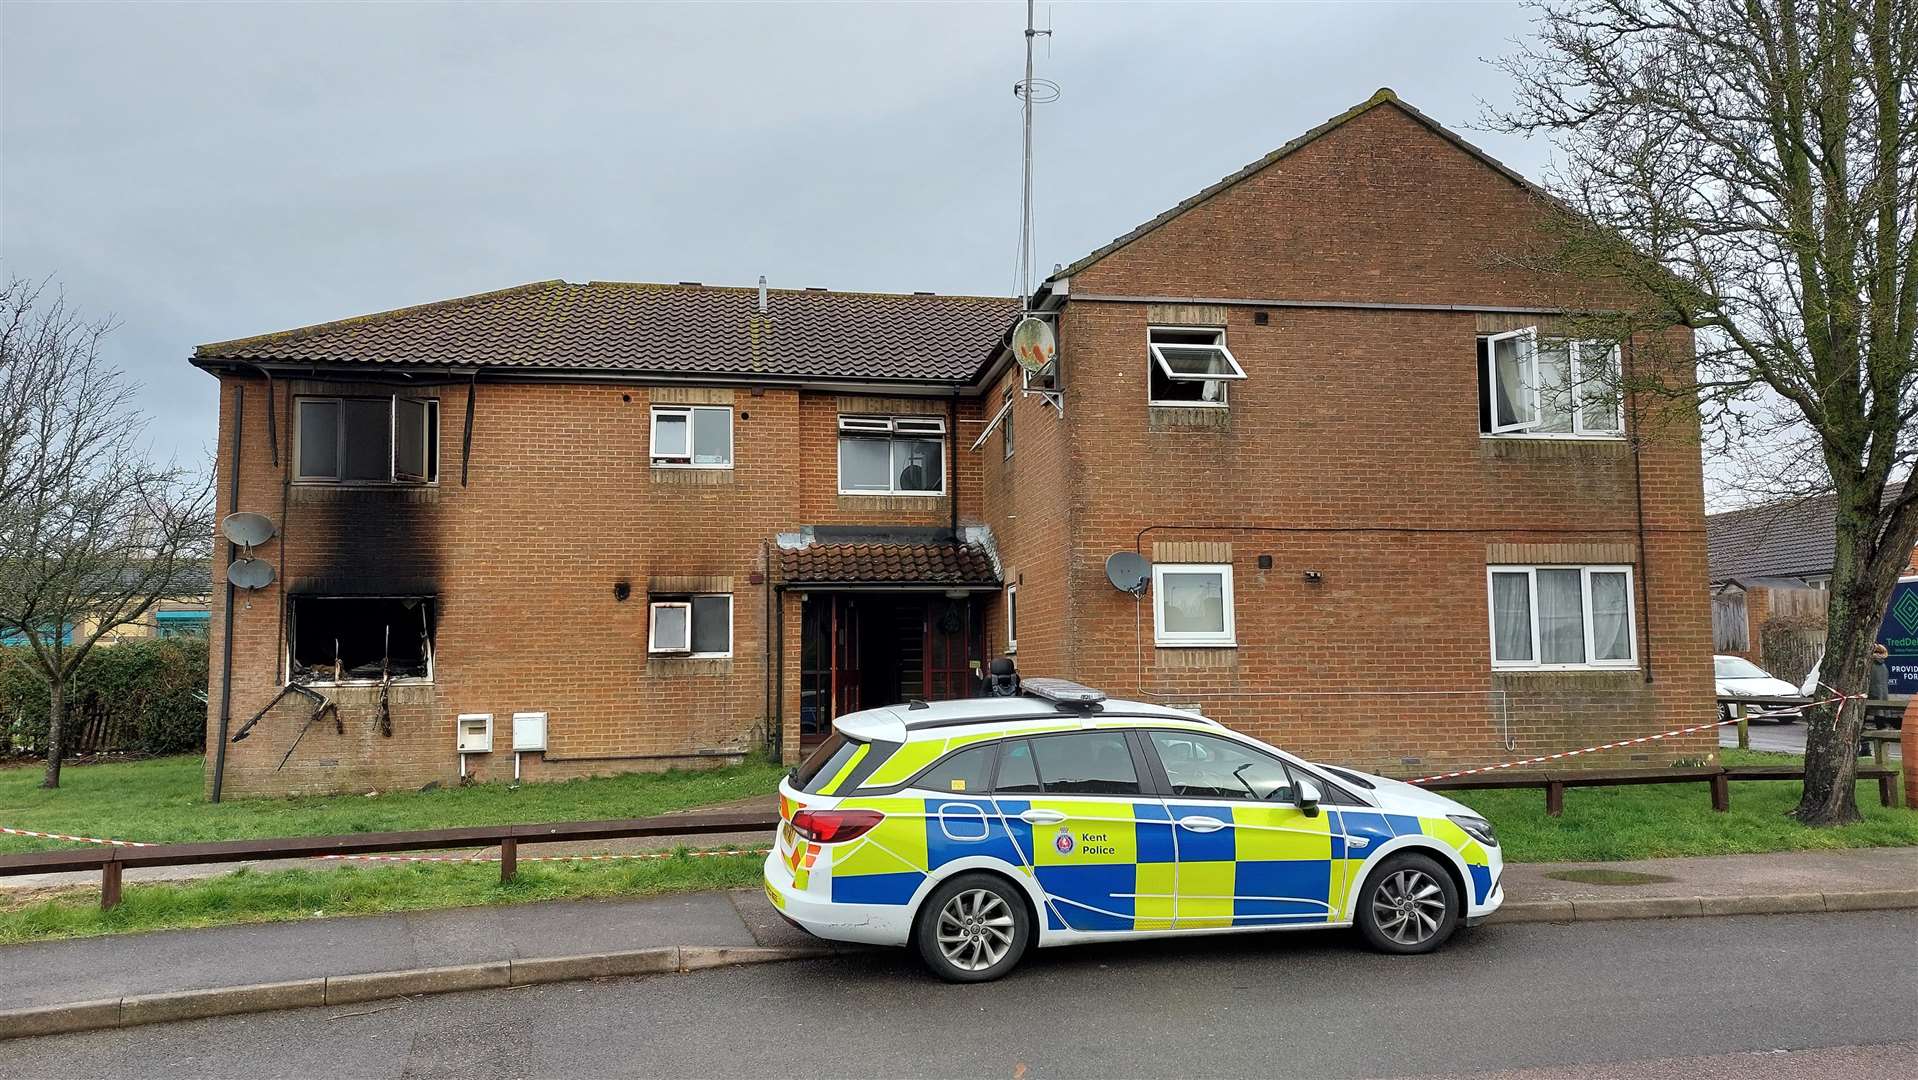 The blaze broke out at flats in Mallards, Willesborough